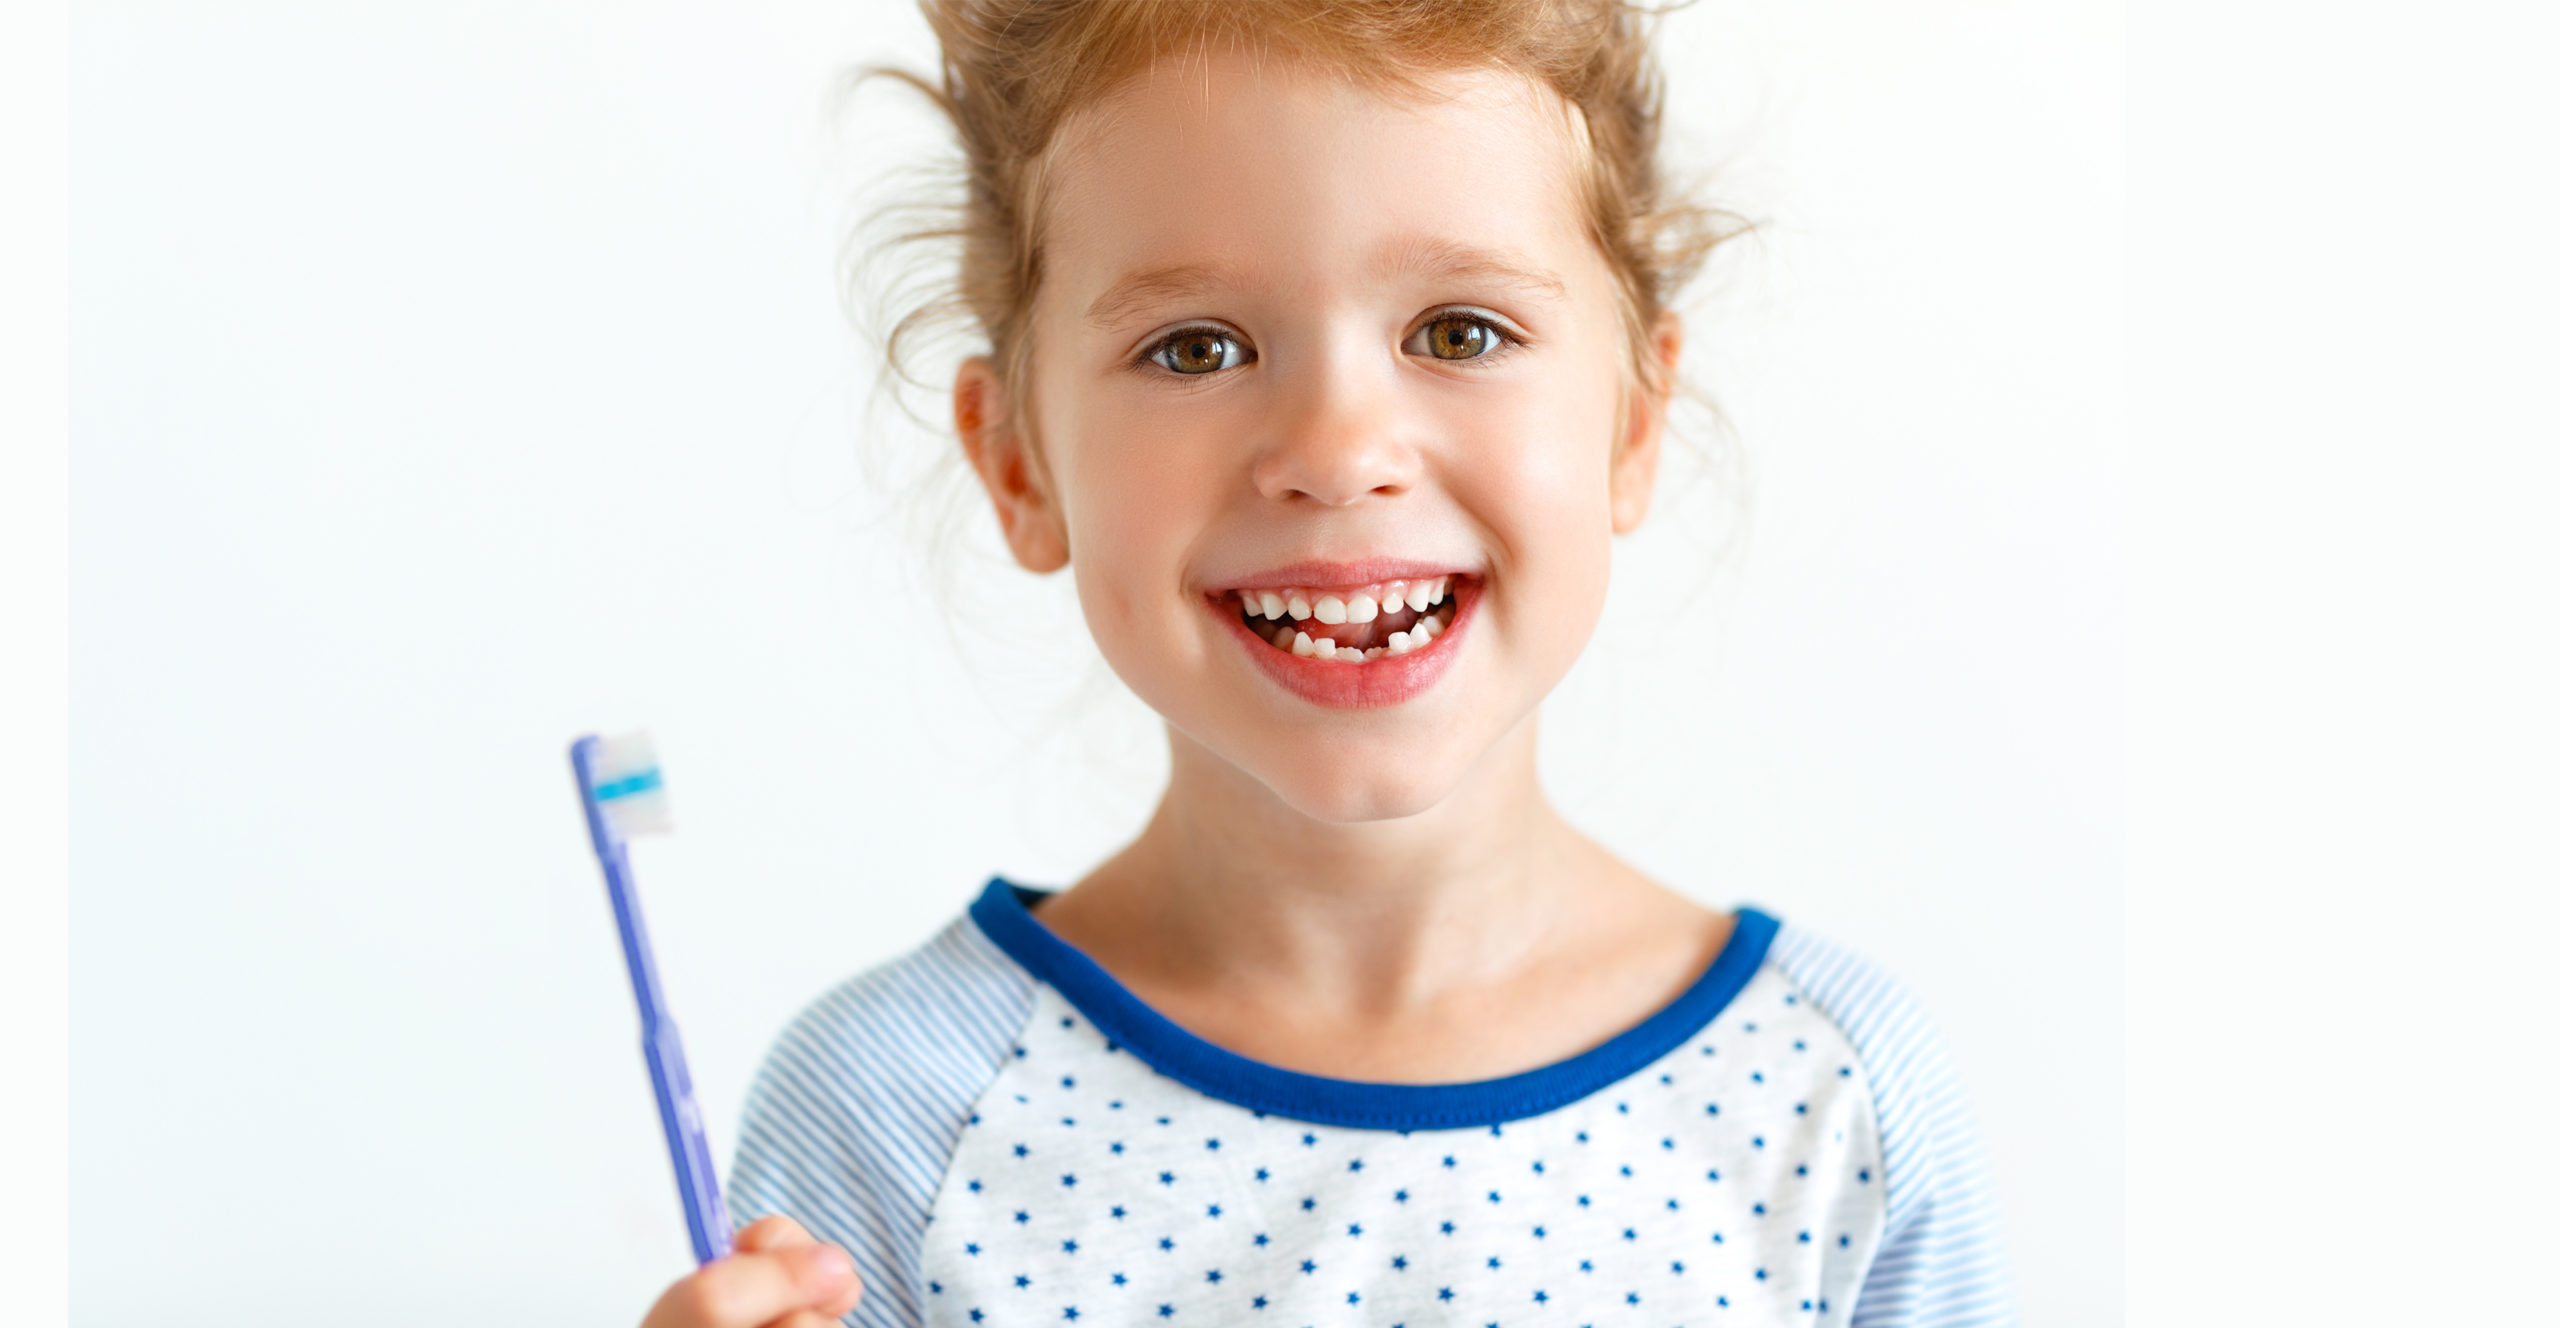 Happy girl, about 7, holds toothbrush and smiles, revealing two missing front bottom teeth.